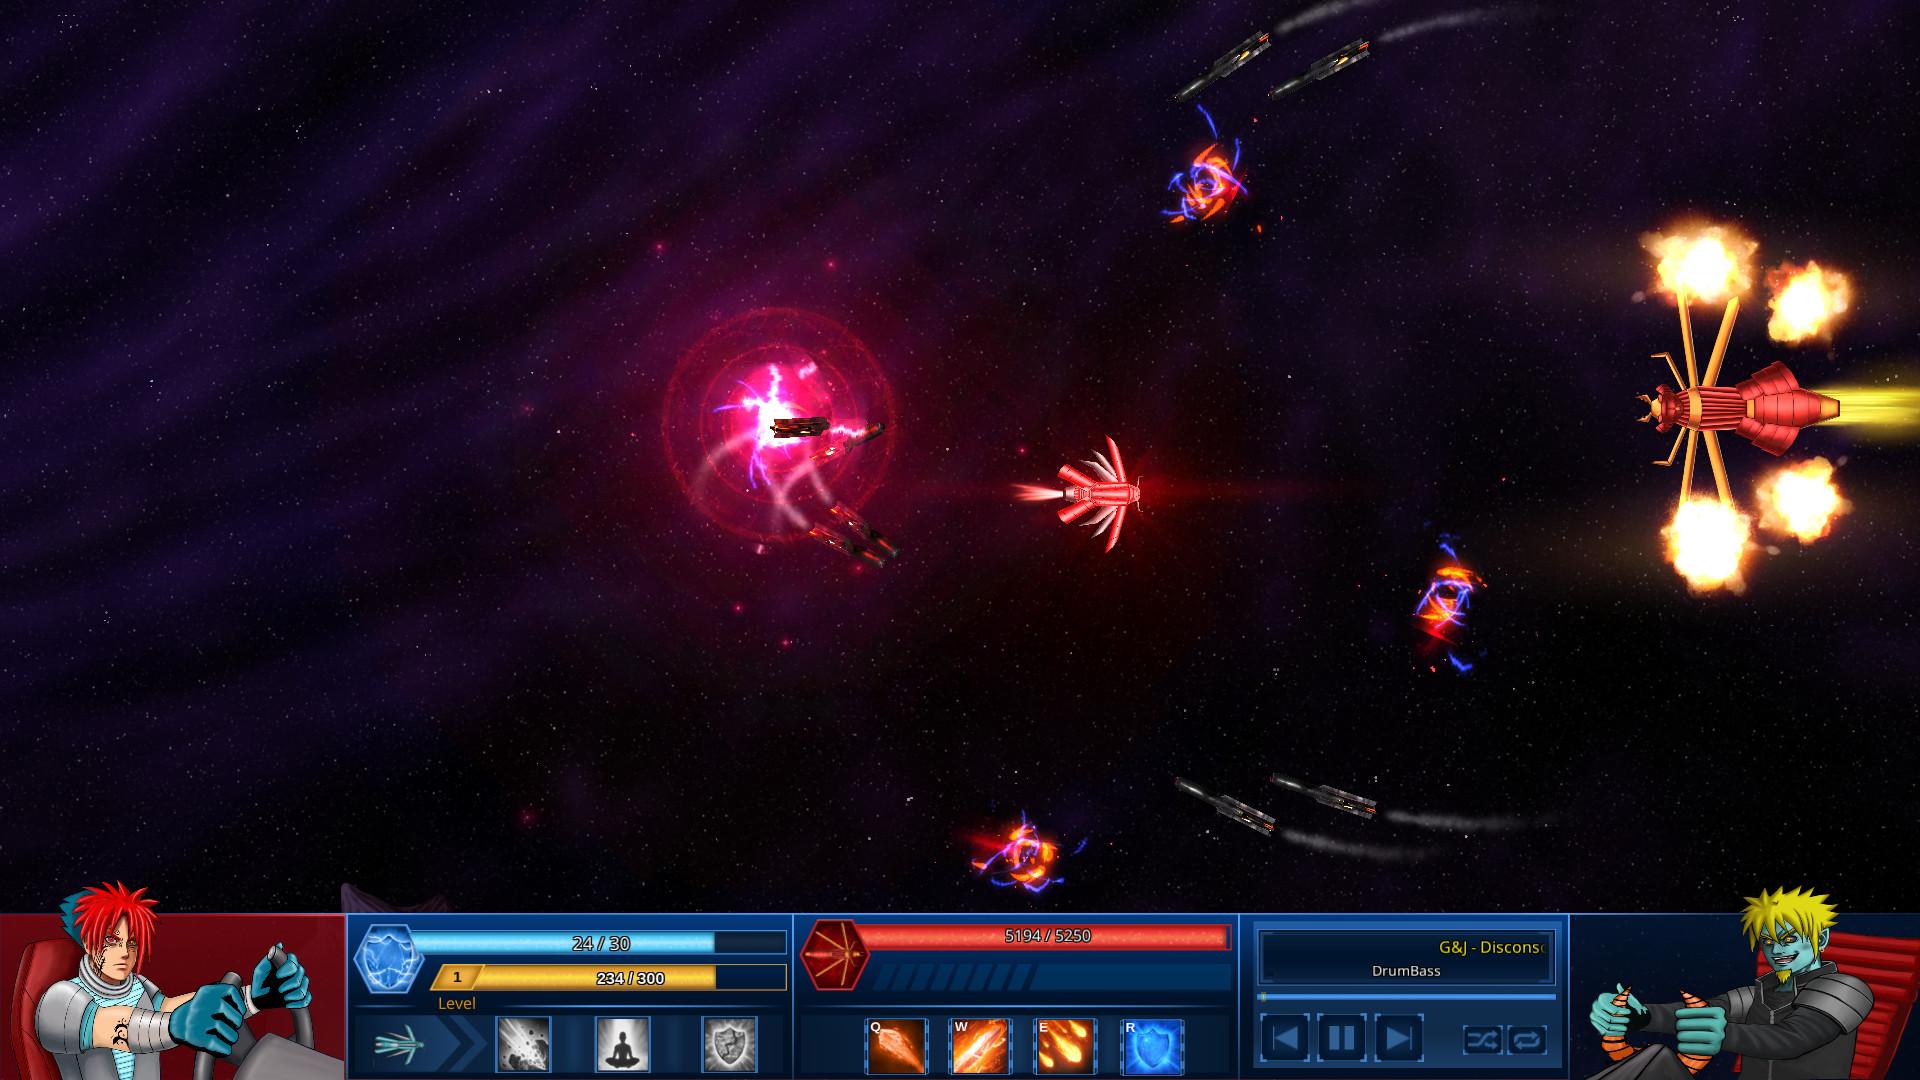 Screenshot №16 from game Survive in Space